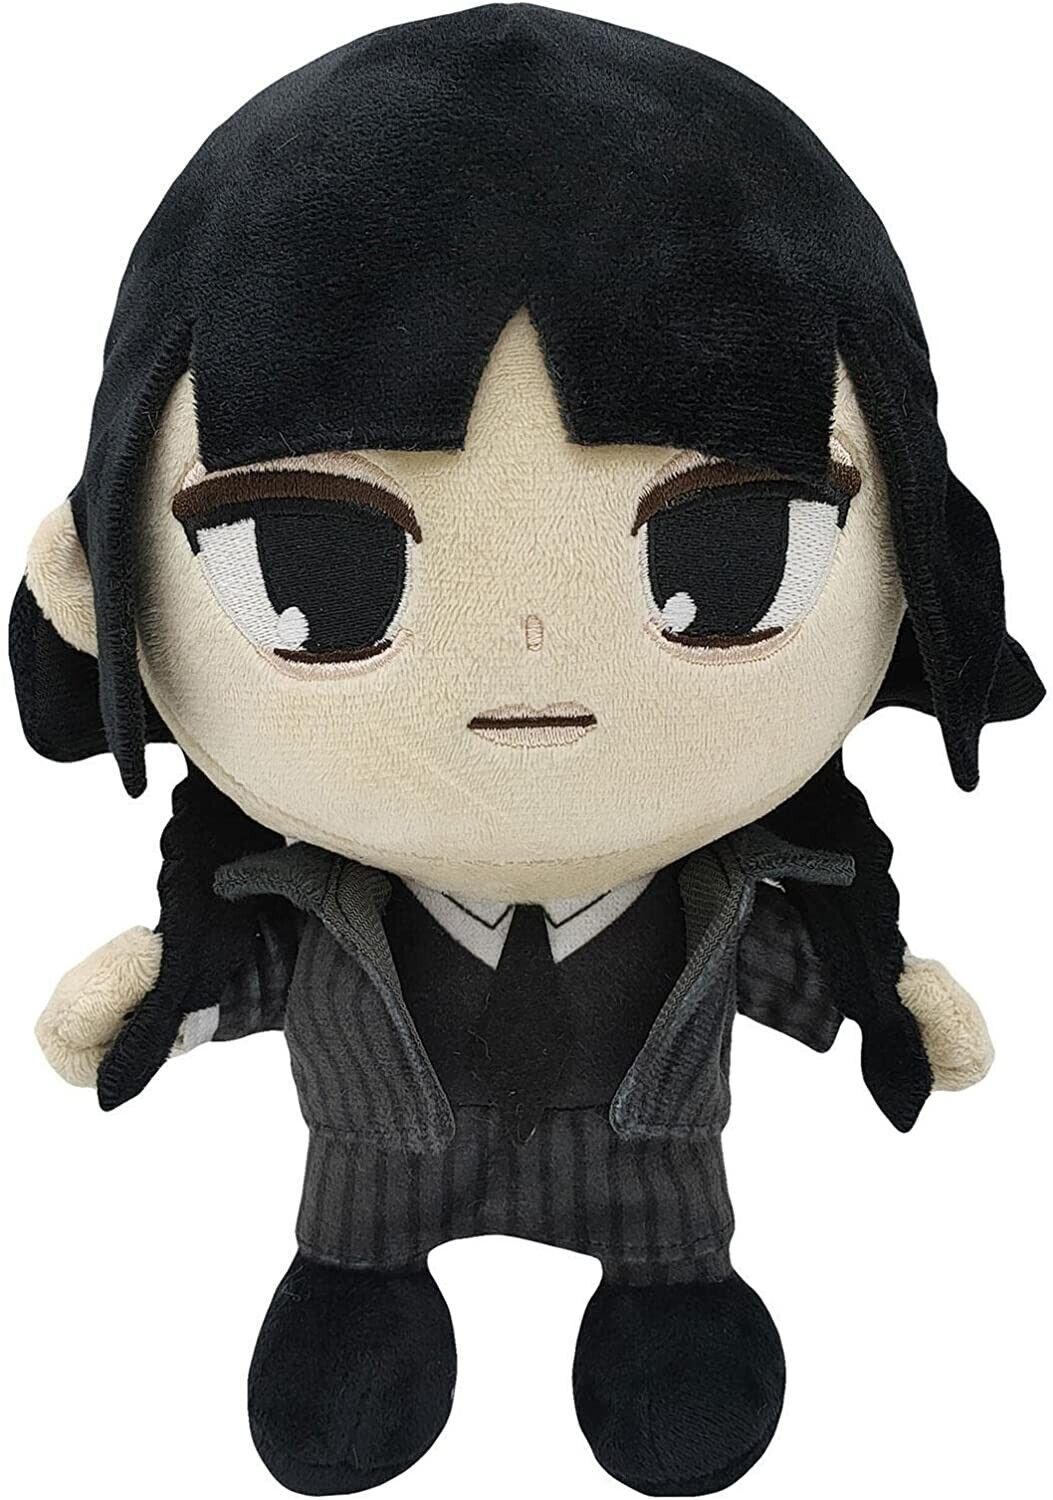 Wednesday Addams Plush Doll Figure Toy 2 - Click Image to Close